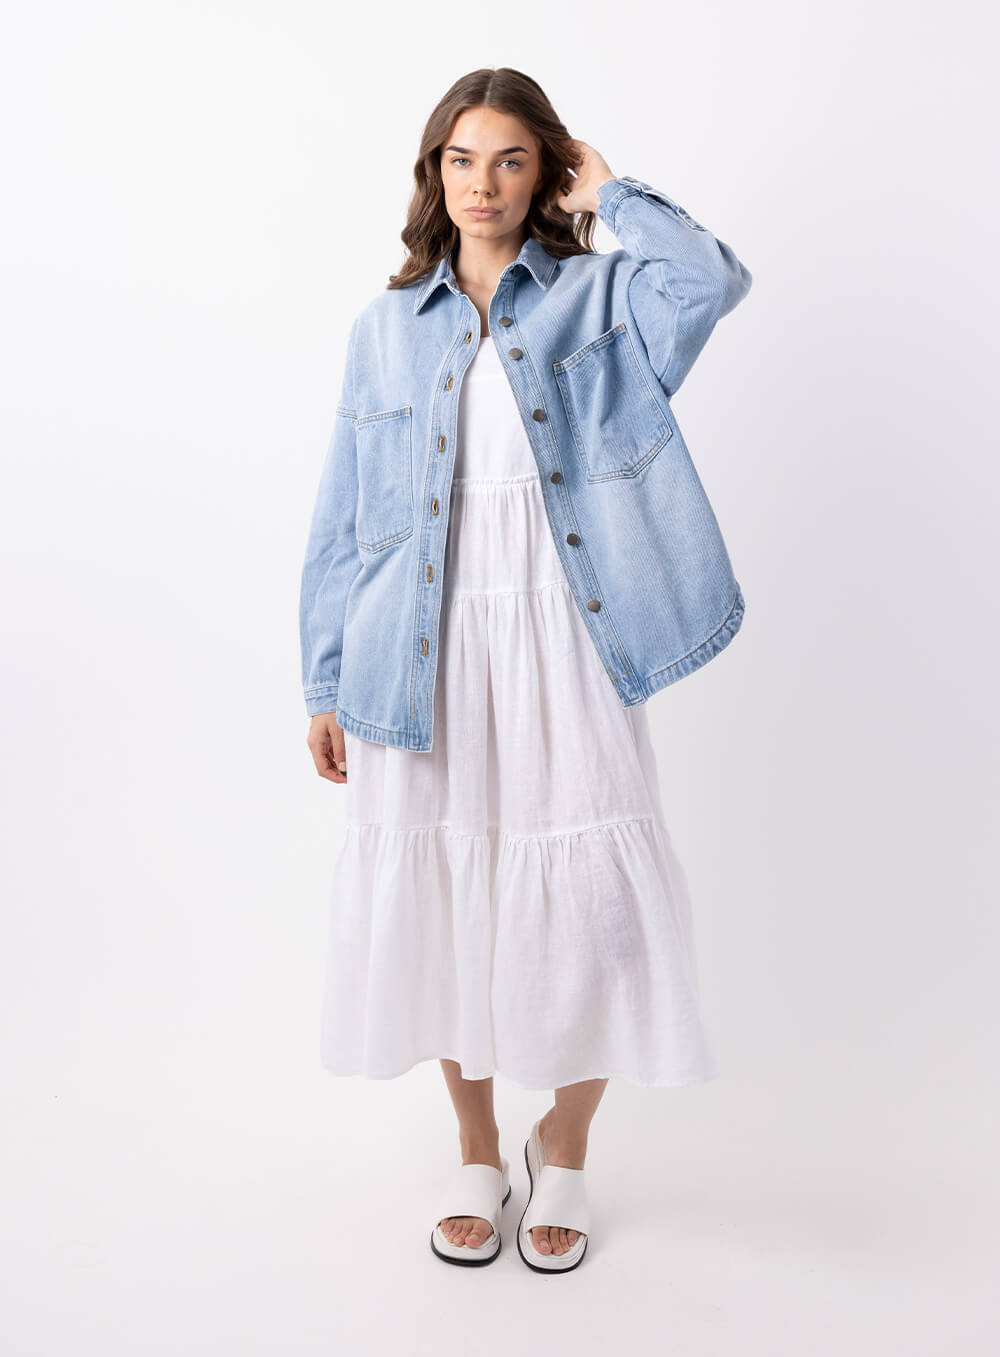 The Wake Up Denim Jacket in blue features full button through front, collar at the neck line, 2 large chest pockets, 2 side pockets, functional button down cuff adn scoop hem.